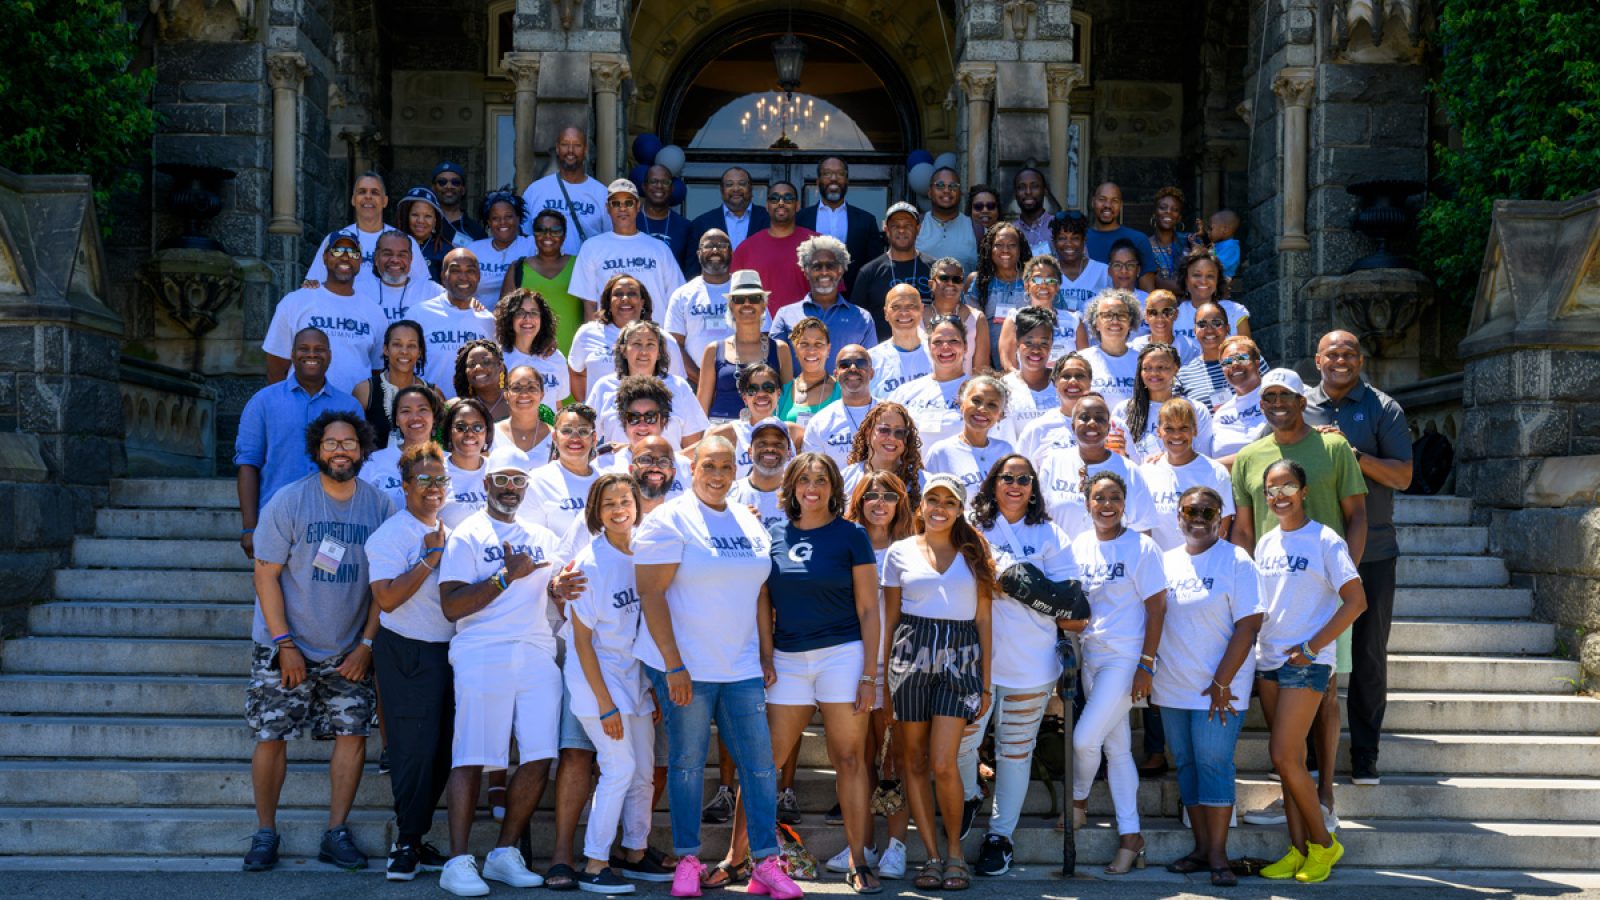 Members of the organizes the Soul Hoyas pose for a picture on the steps of Healy Hall during their annual reunion event. Many of the group members wear white T-shirts that say, &quot;Soul Hoya Alumni&quot;